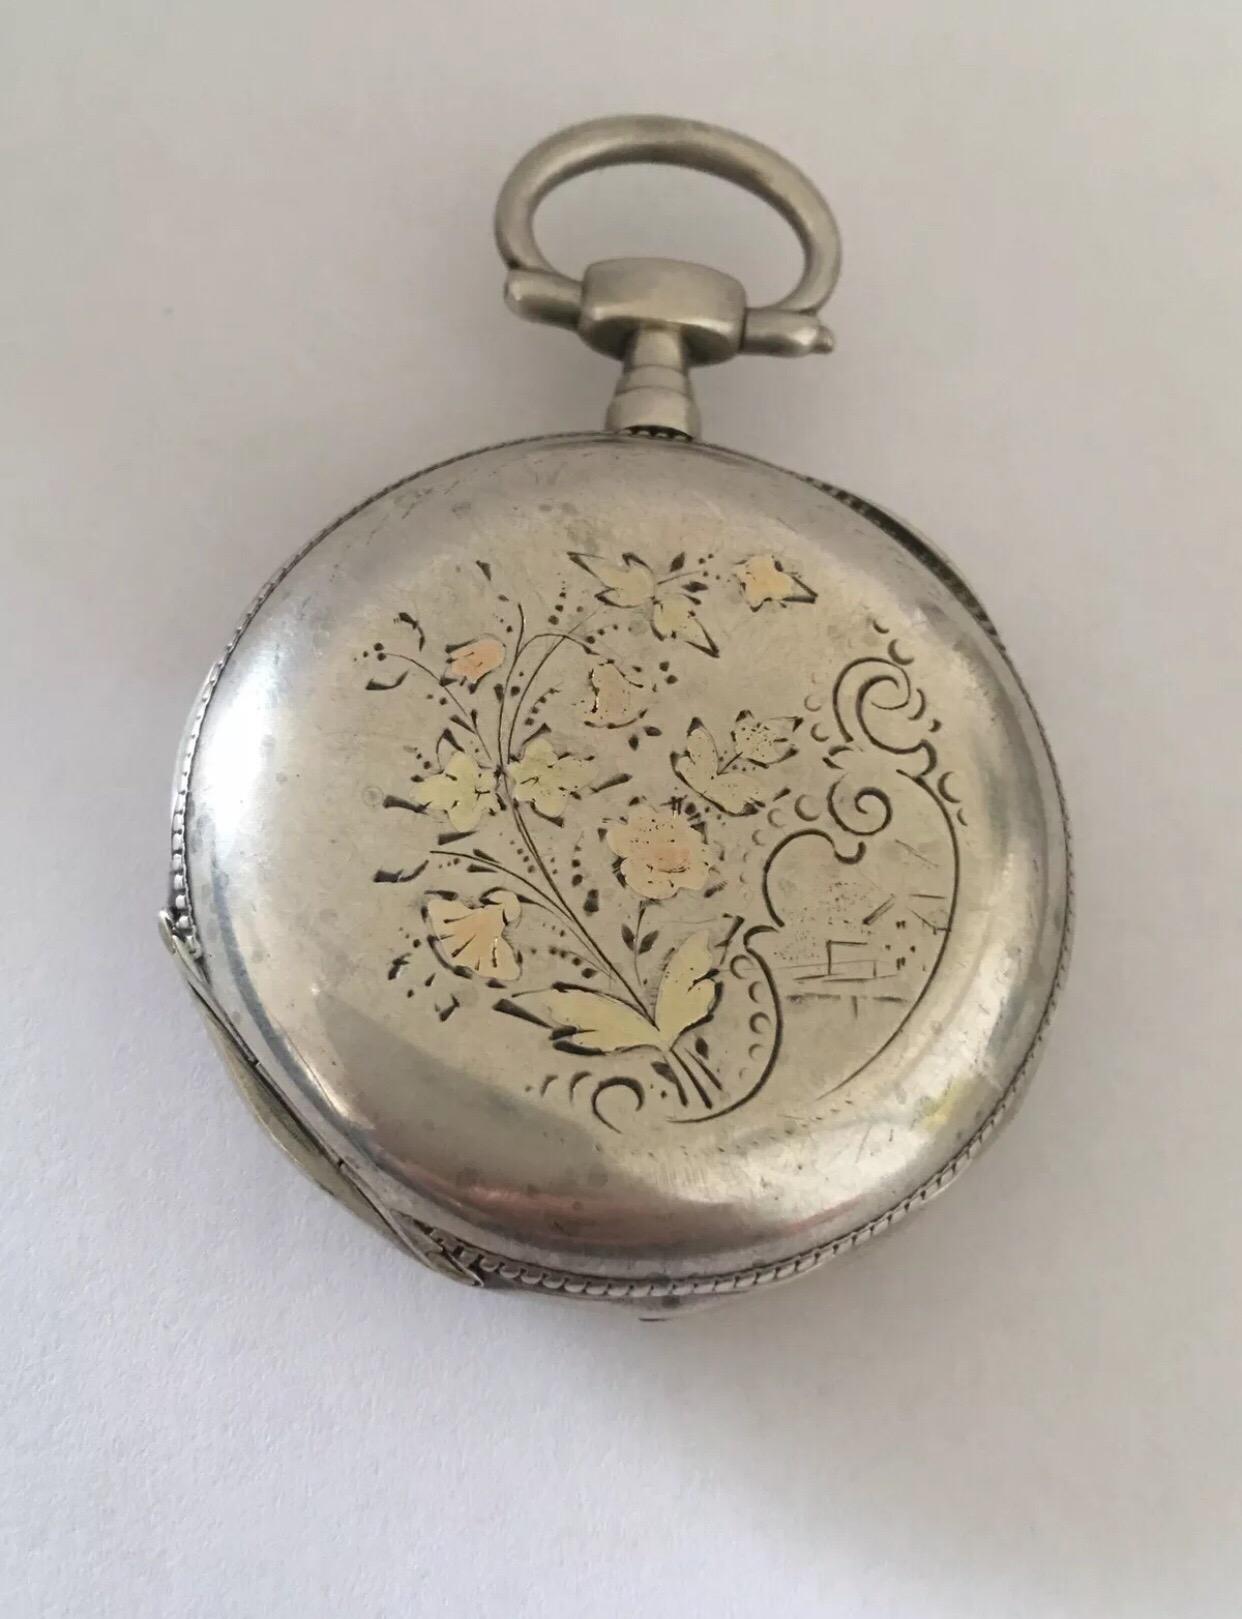 Antique Beautiful Enamel Inlaid Key-wind Pocket Watch.


This antique stunning enamel inlaid dial pocket watch is in good working order and is ticking well. Visible chipped on the dial as shown on the photo